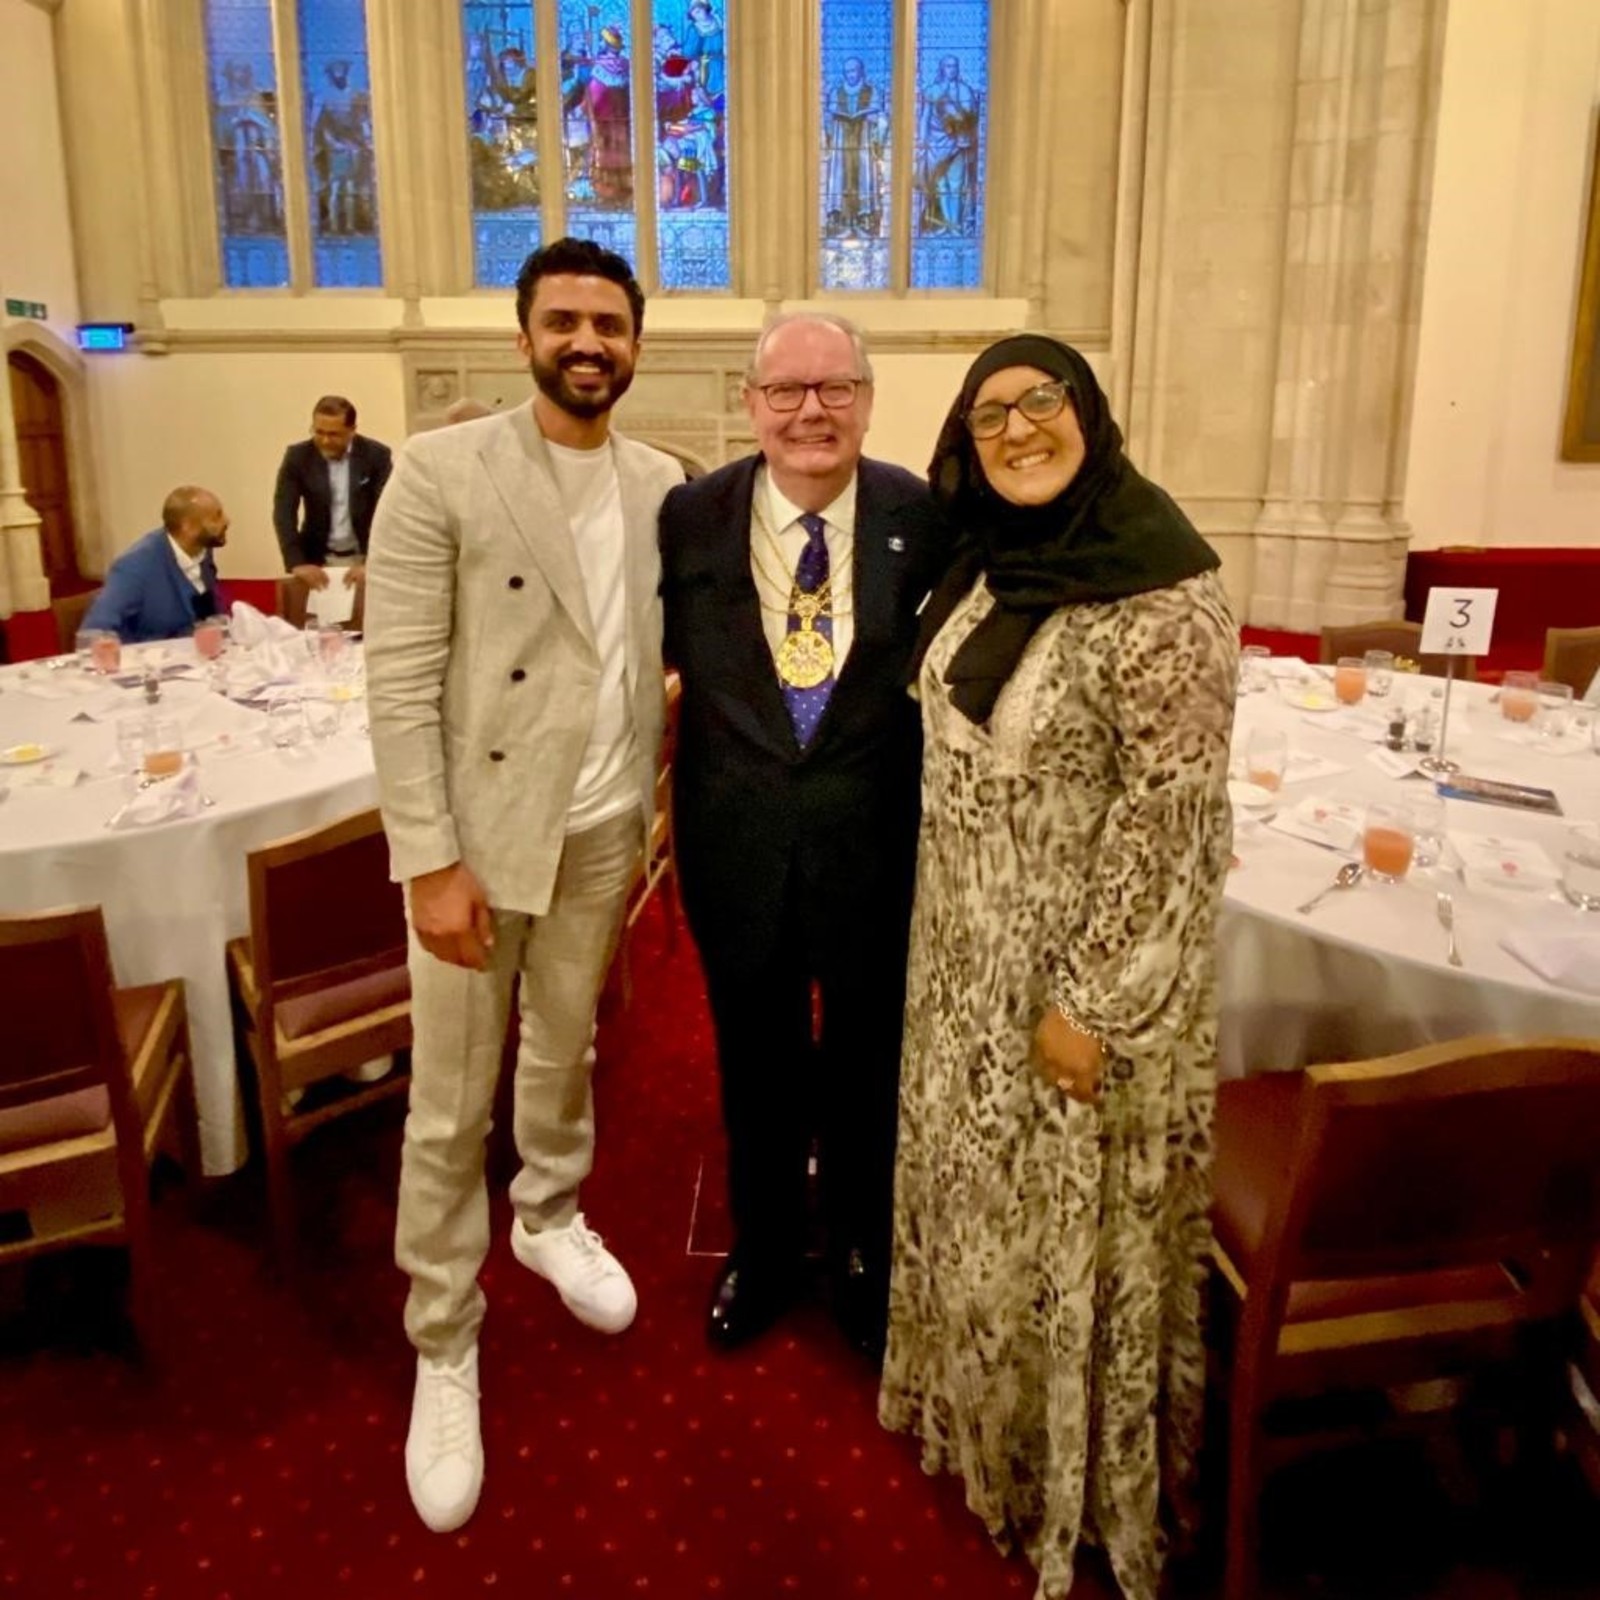 12 July 2023 - Special to attend the Naz Legacy Foundation 10th Anniversary Panel Discussion and Eid celebration, The flagship Interfaith Iftar, which brings together young people and community, political and faith leaders to build networks and strengthen unity between diverse groups. 